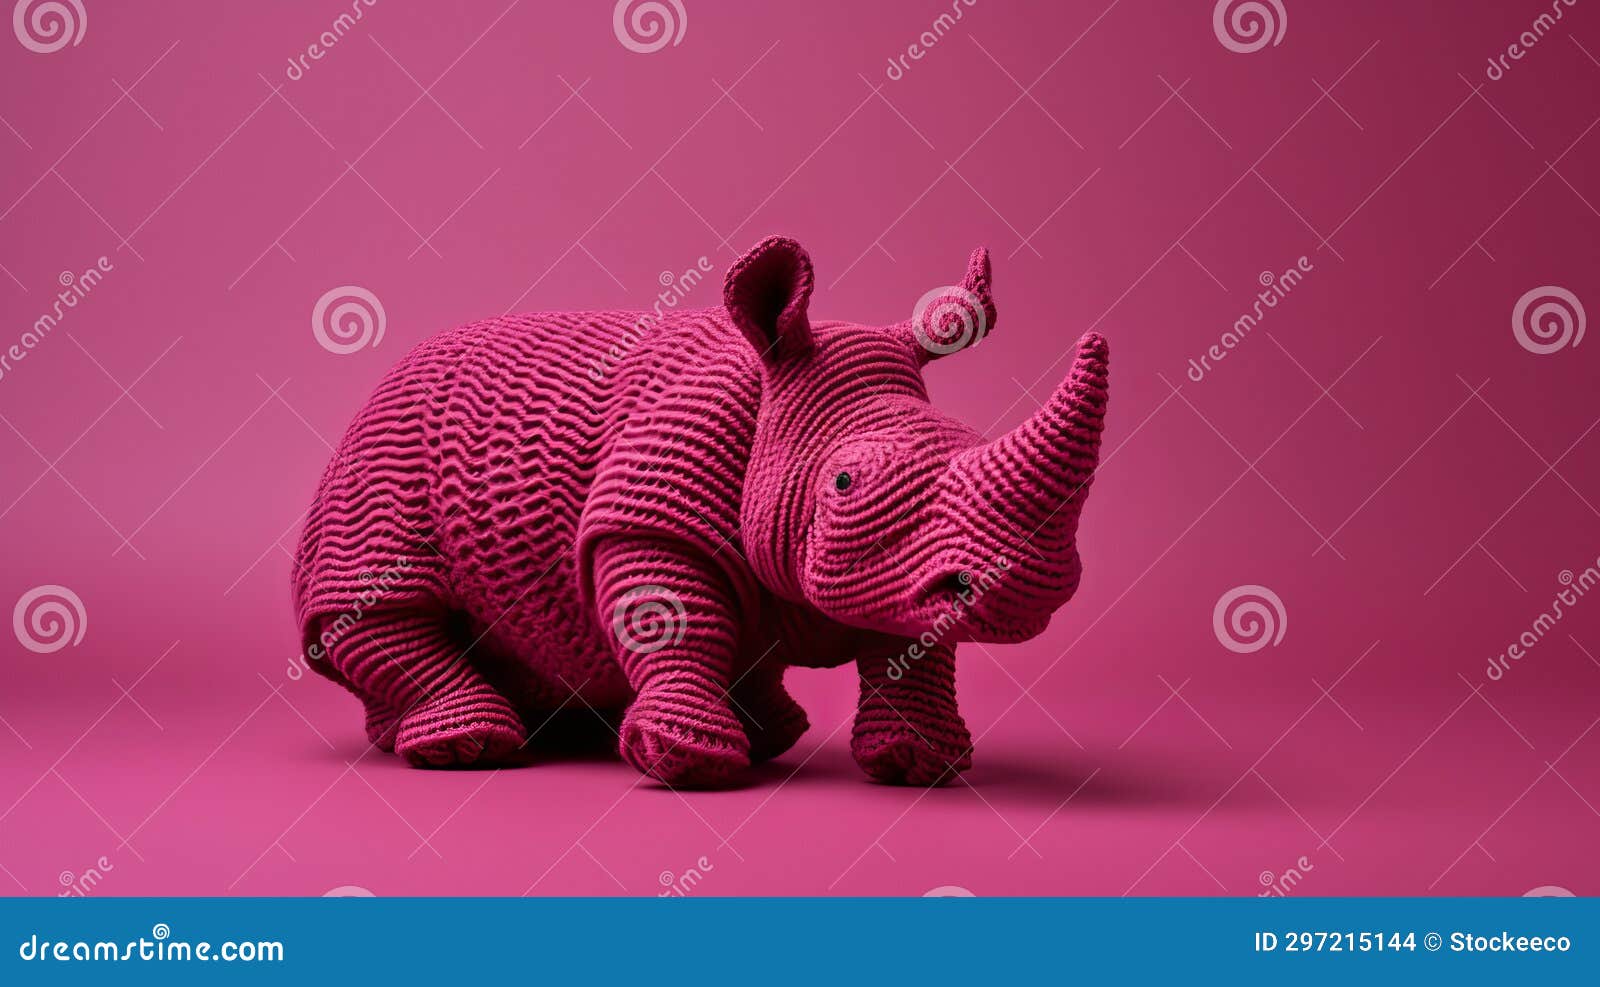 maroon knitted rhino toy on pink background